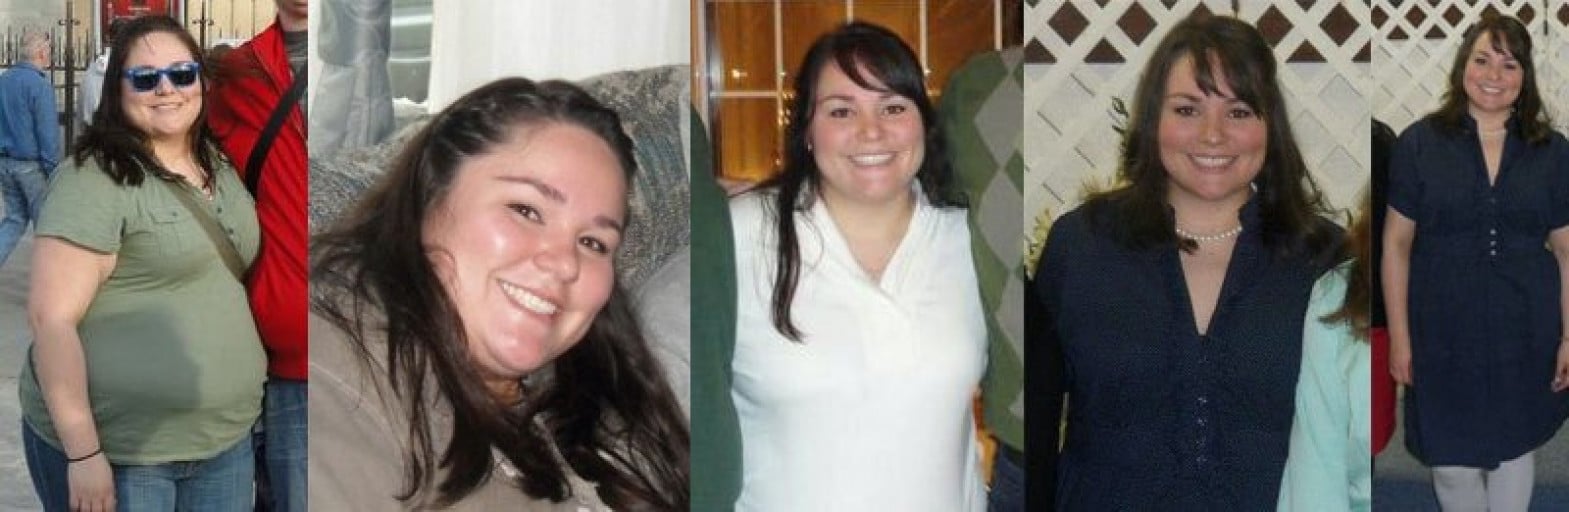 A before and after photo of a 5'3" female showing a weight reduction from 265 pounds to 195 pounds. A total loss of 70 pounds.